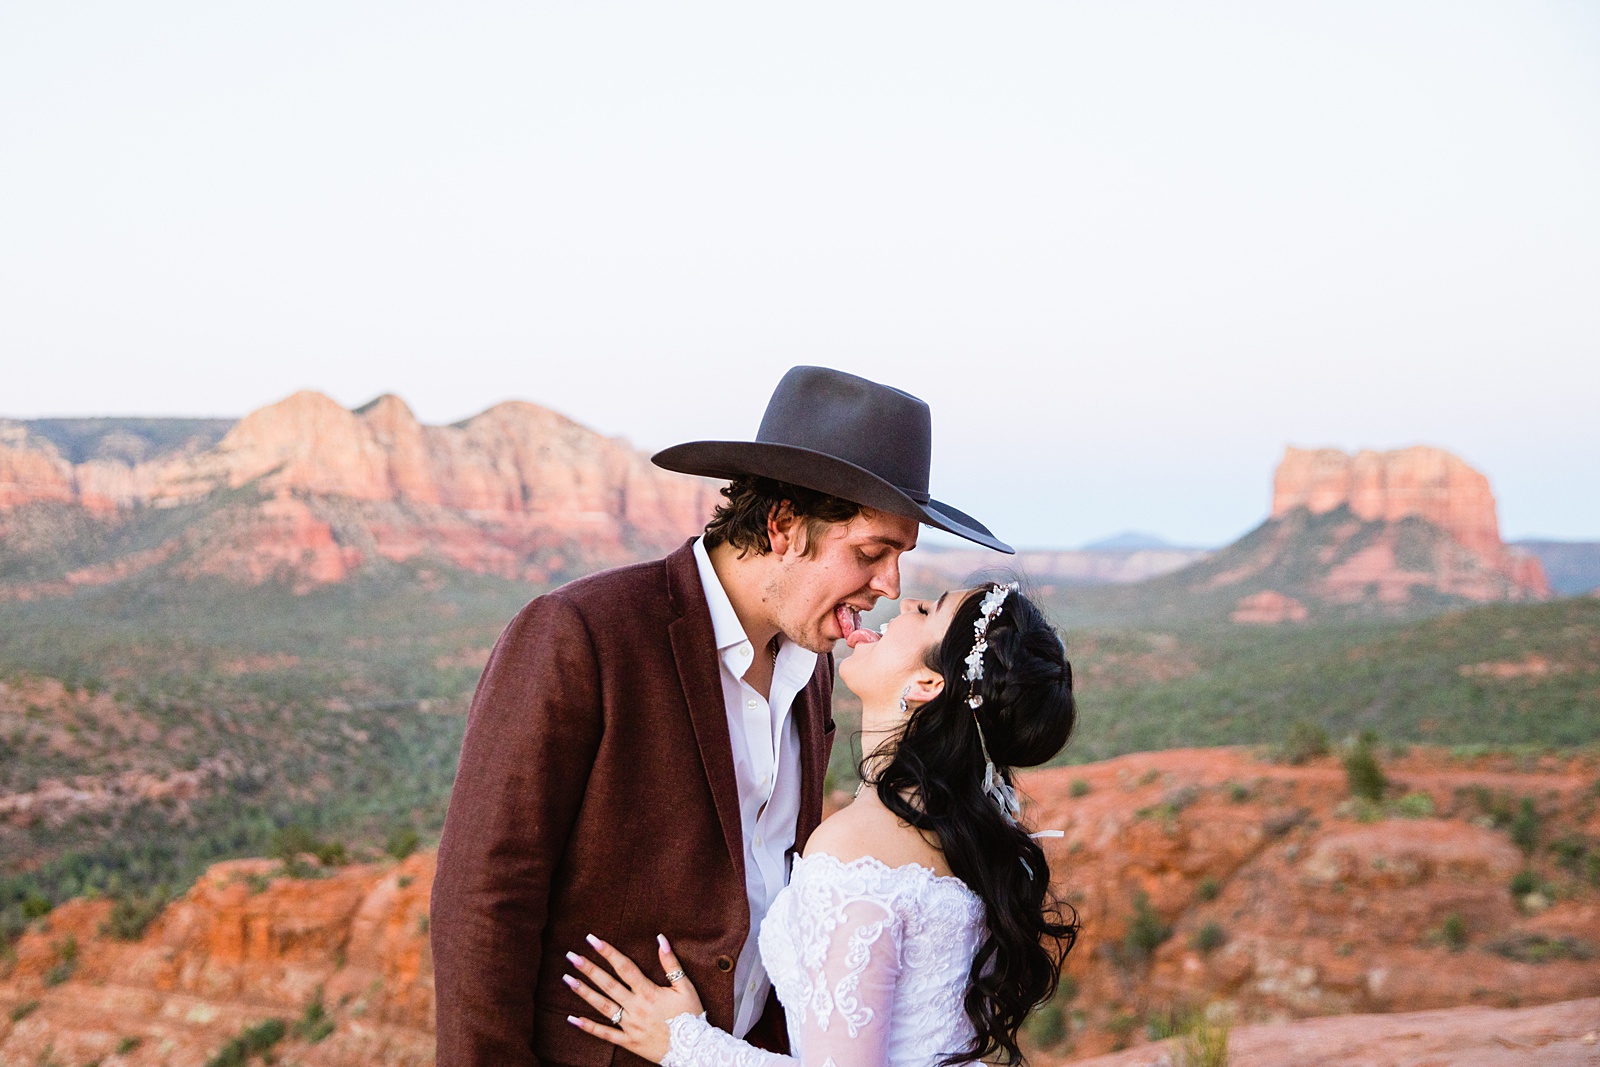 Bride and Groom having fun together during their Cathedral Rock elopement by Sedona elopement photographer PMA Photography.